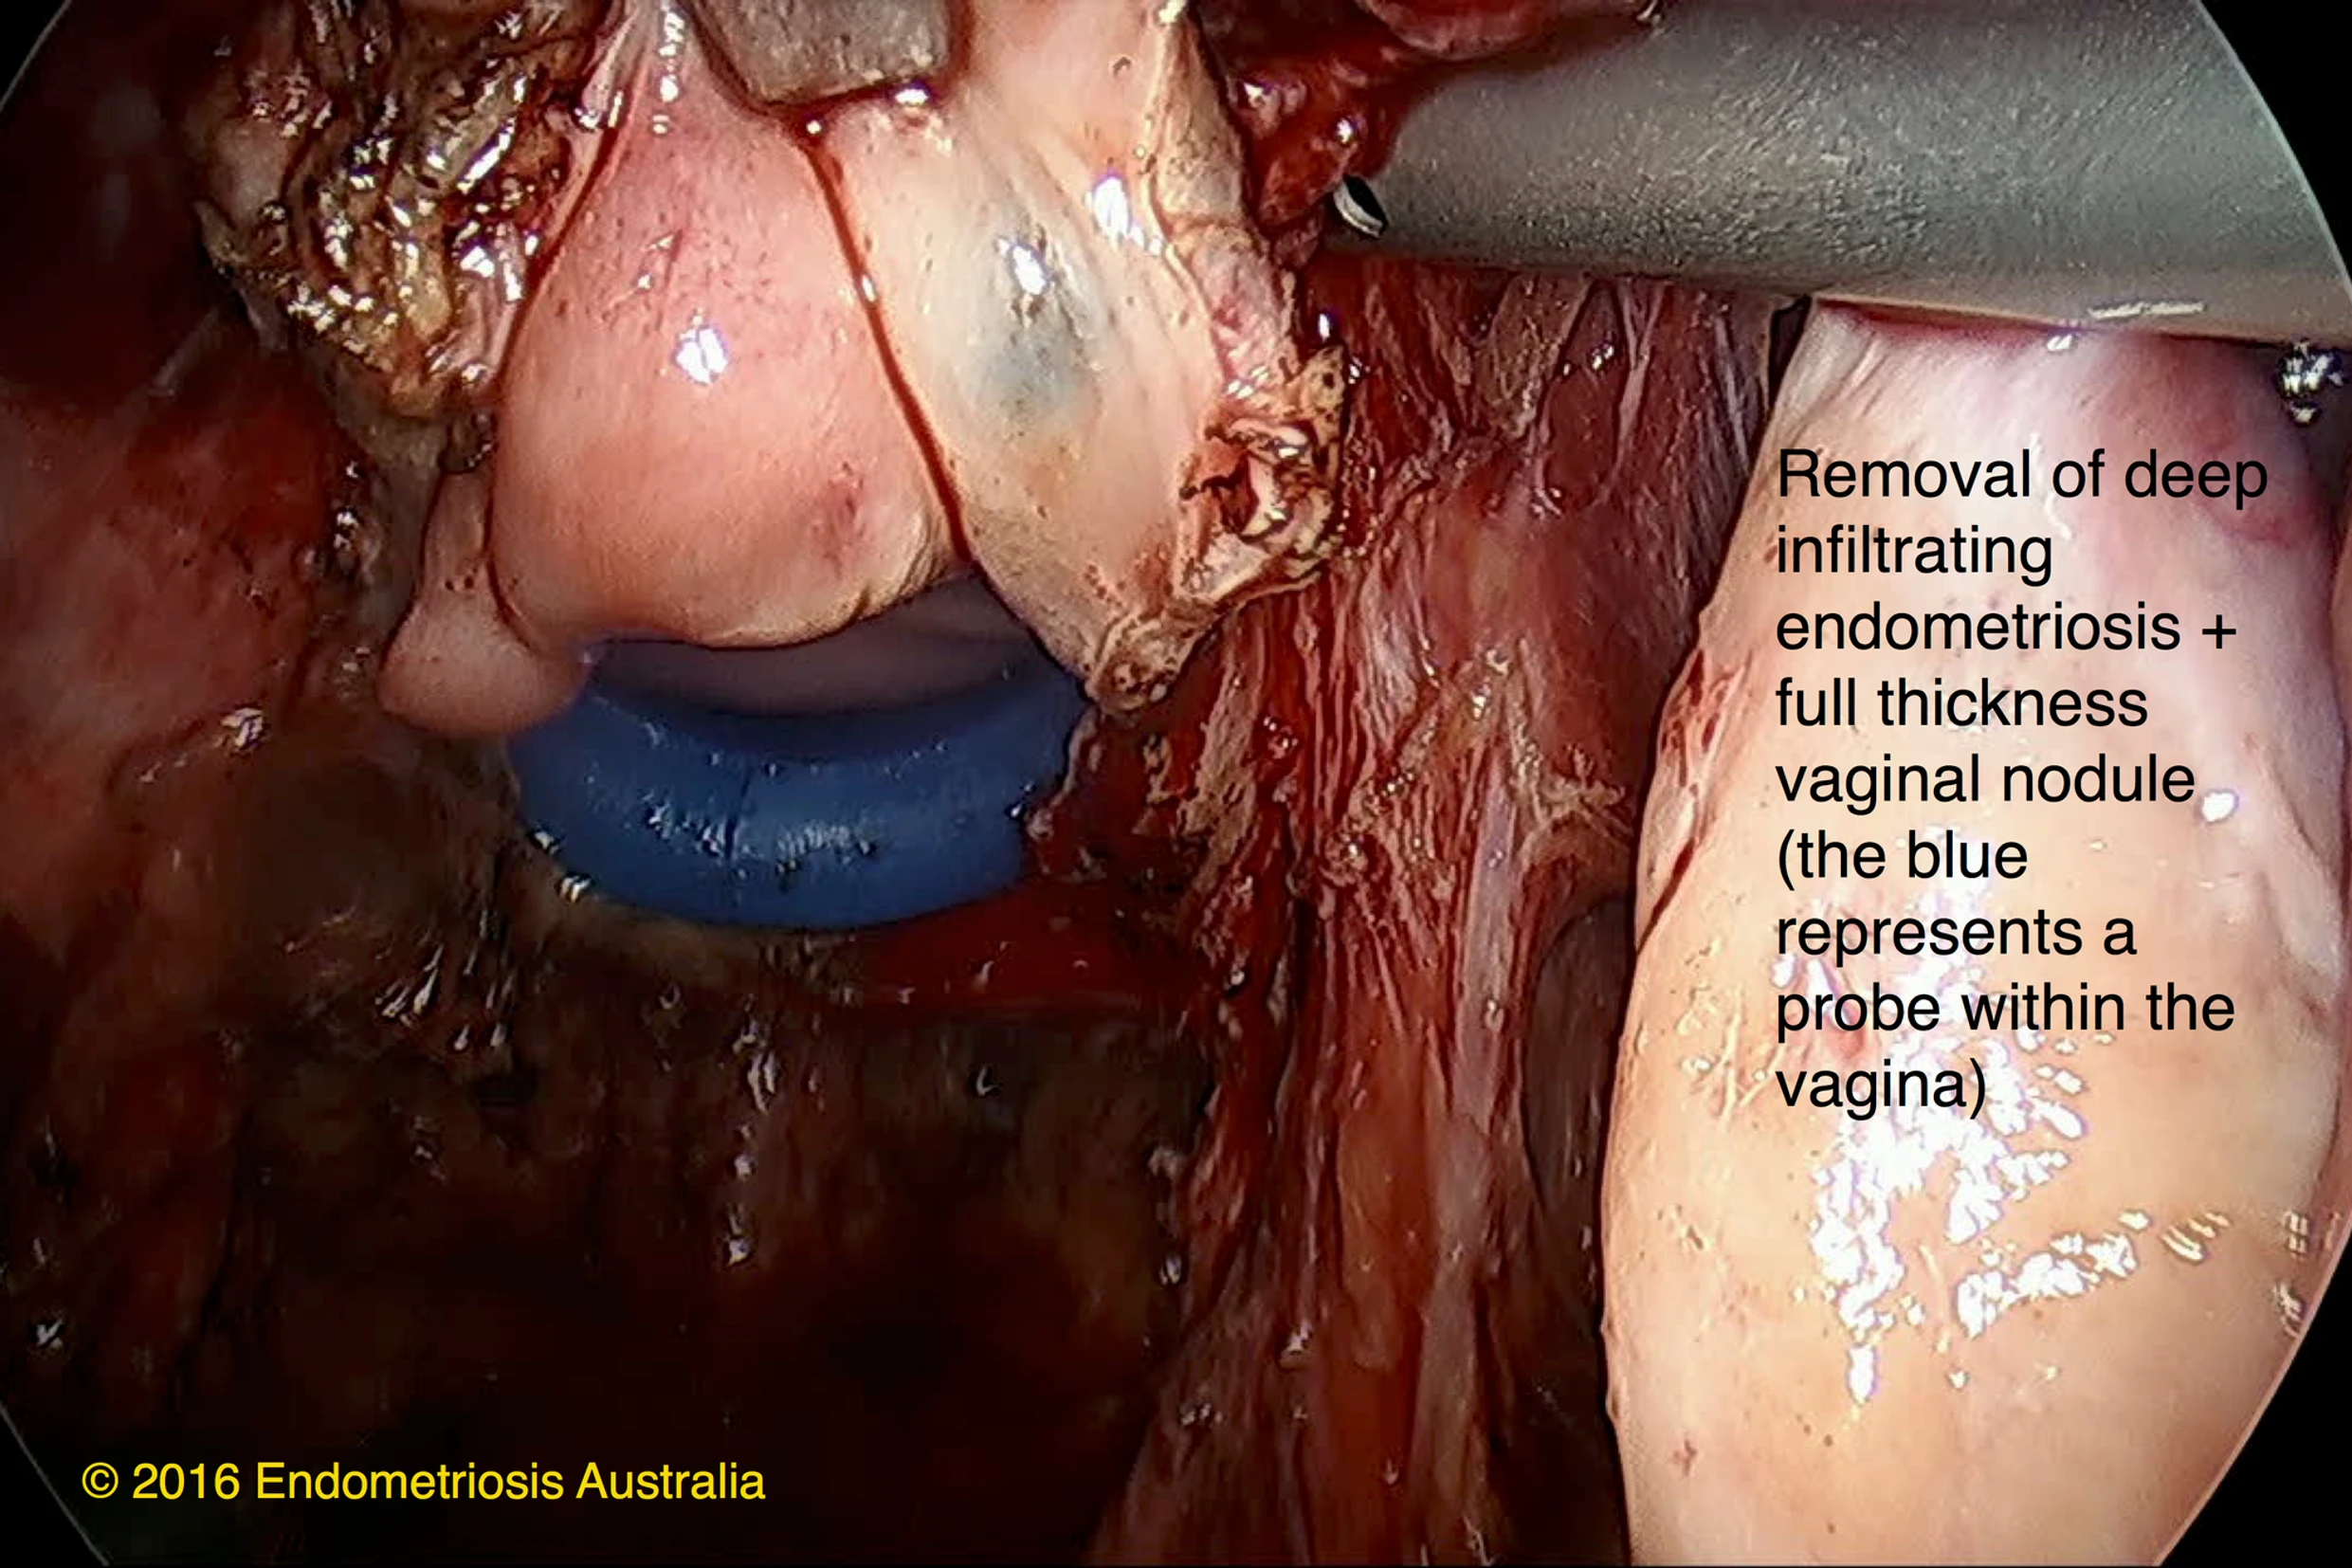 Removal of deep infiltrating endometriosis and full thickness vaginal nodule (the blue represents a probe within the vagina)